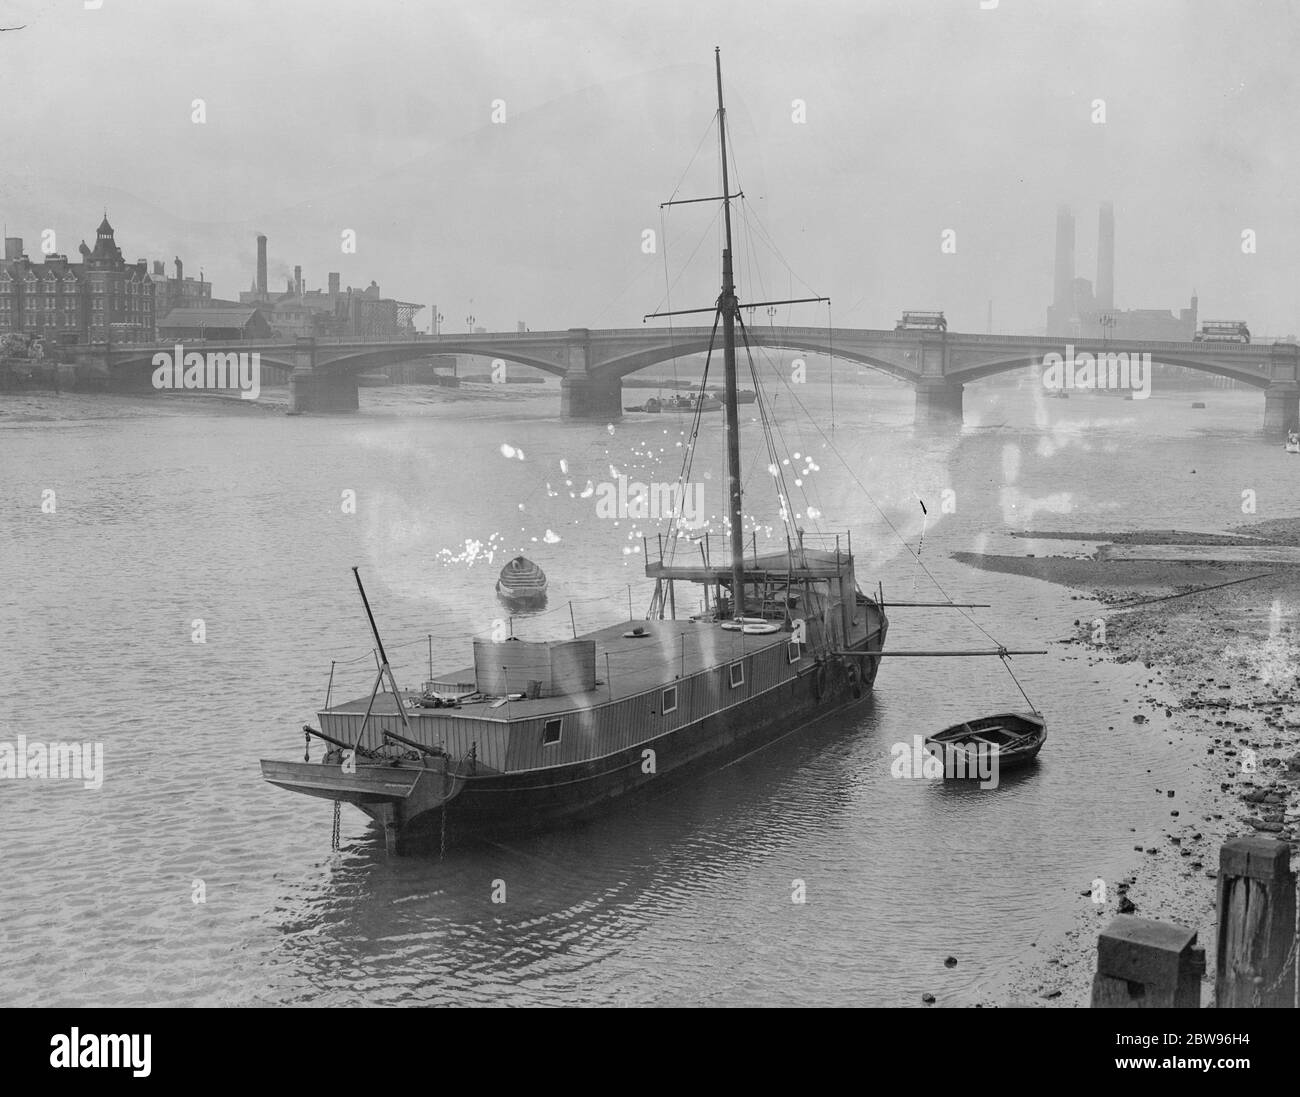 Training ship afloat again after being sunk in Thames . The training ship Nelson , which sank at her moorings on the Thames off Chelsea Embankment , was floated again at low tide . the vessel was used by sea scouts for training . The Nelson afloat again after her mishap . 1 October 1932 Stock Photo